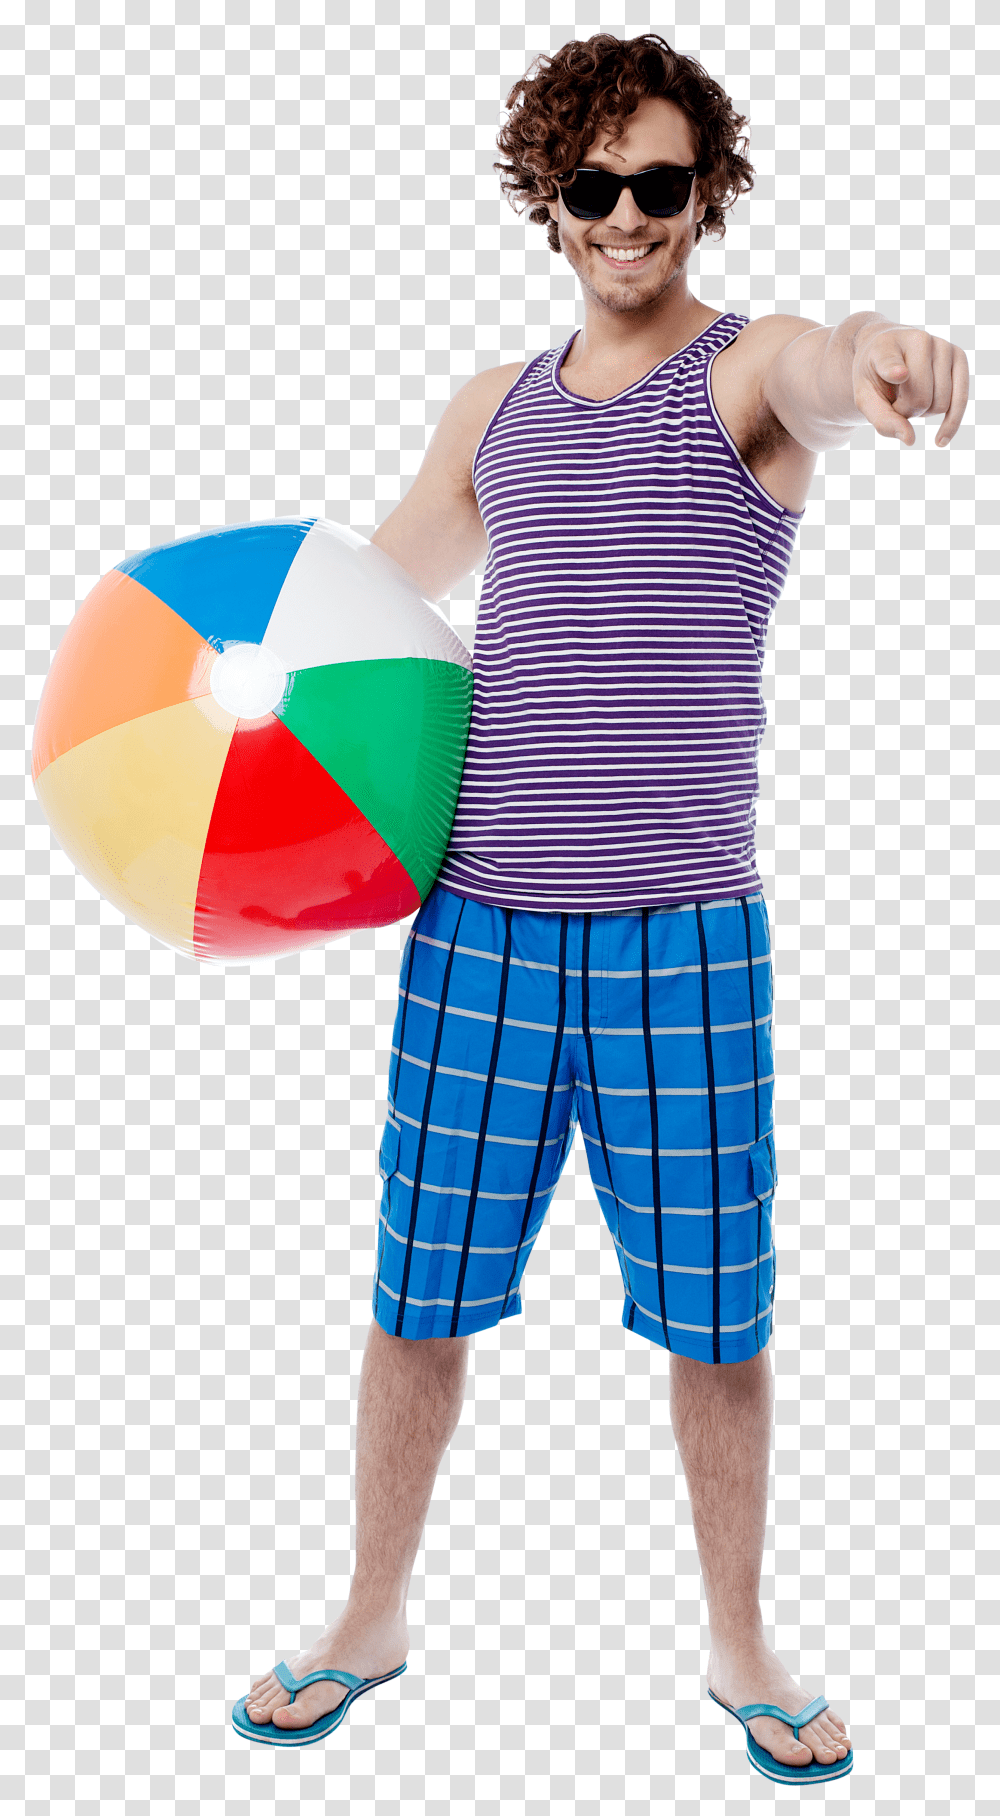 Download Men With Beach Ball Image Going To Beach Transparent Png